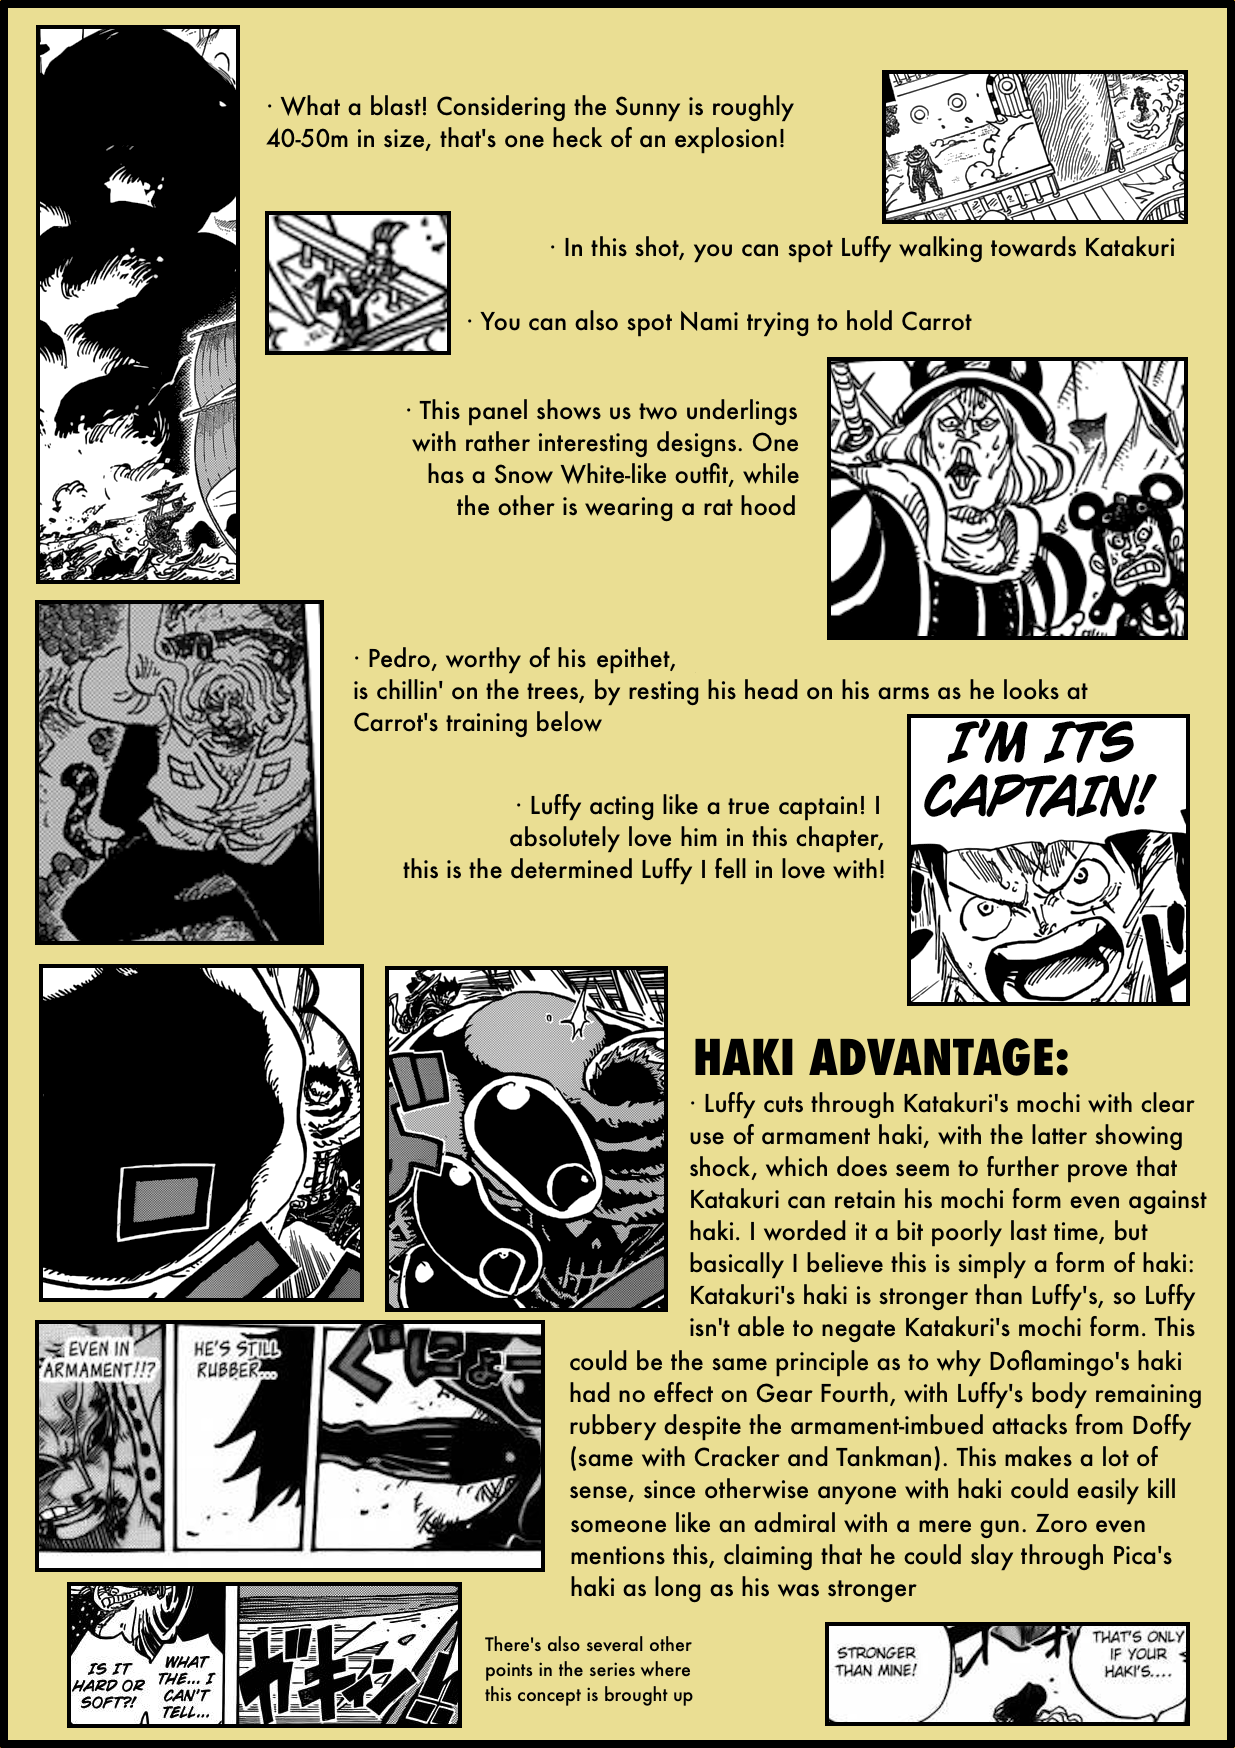 Chapter 878: "Mink tribe, Guardians Chief Pedro" 878-41